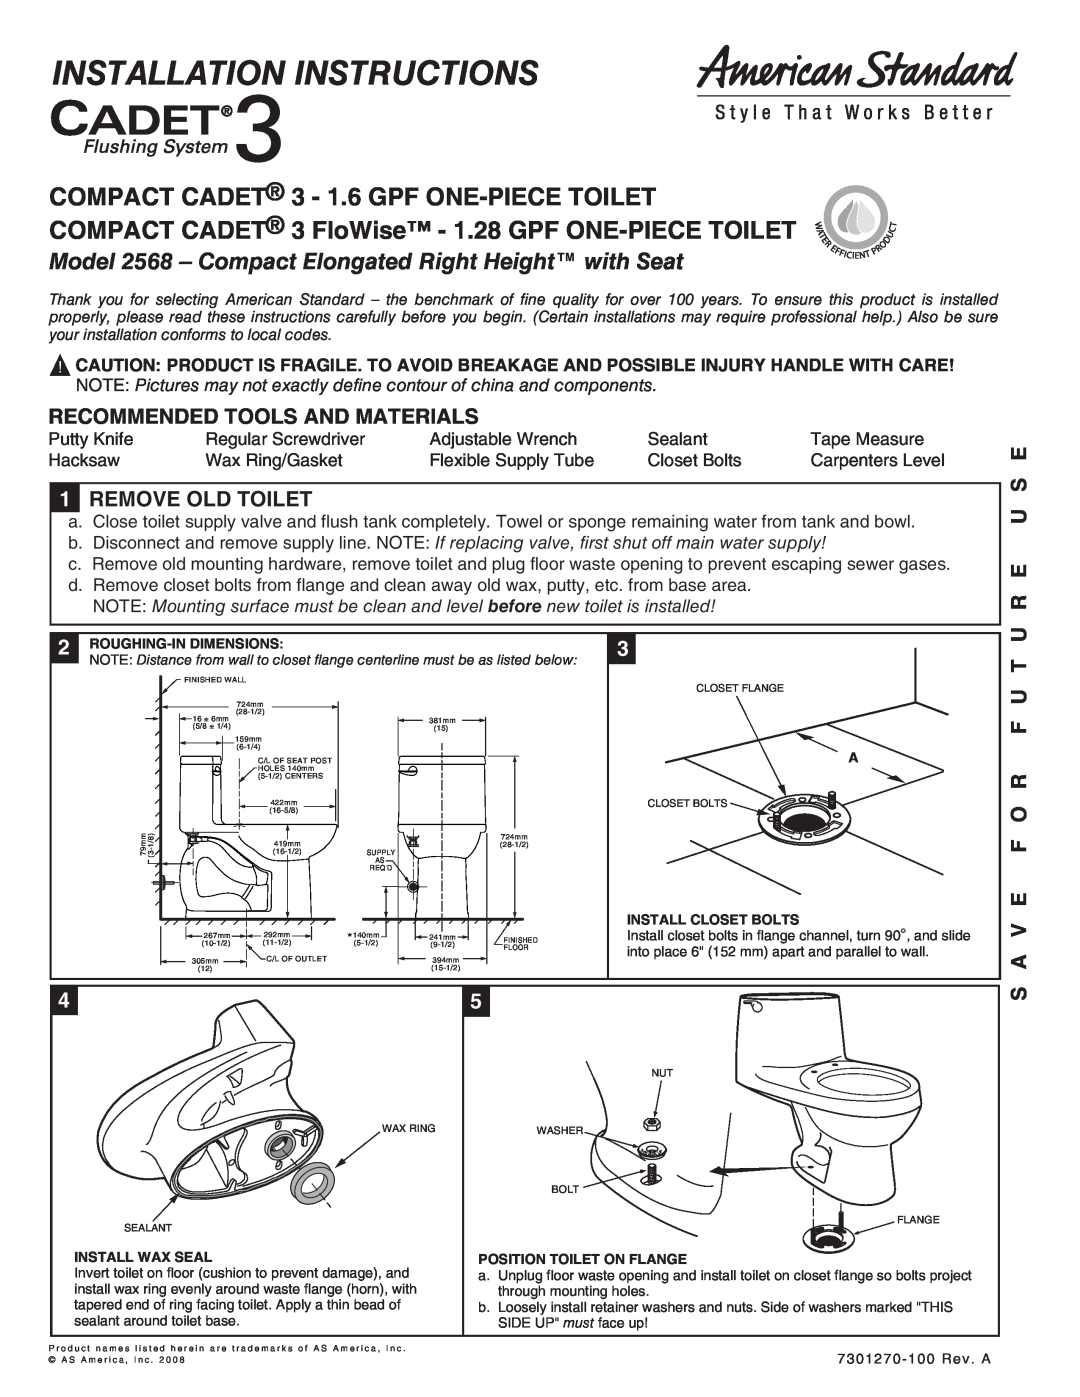 American Standard 2568 installation instructions Recommended Tools And Materials, Remove Old Toilet, U R E U S E, R F U T 